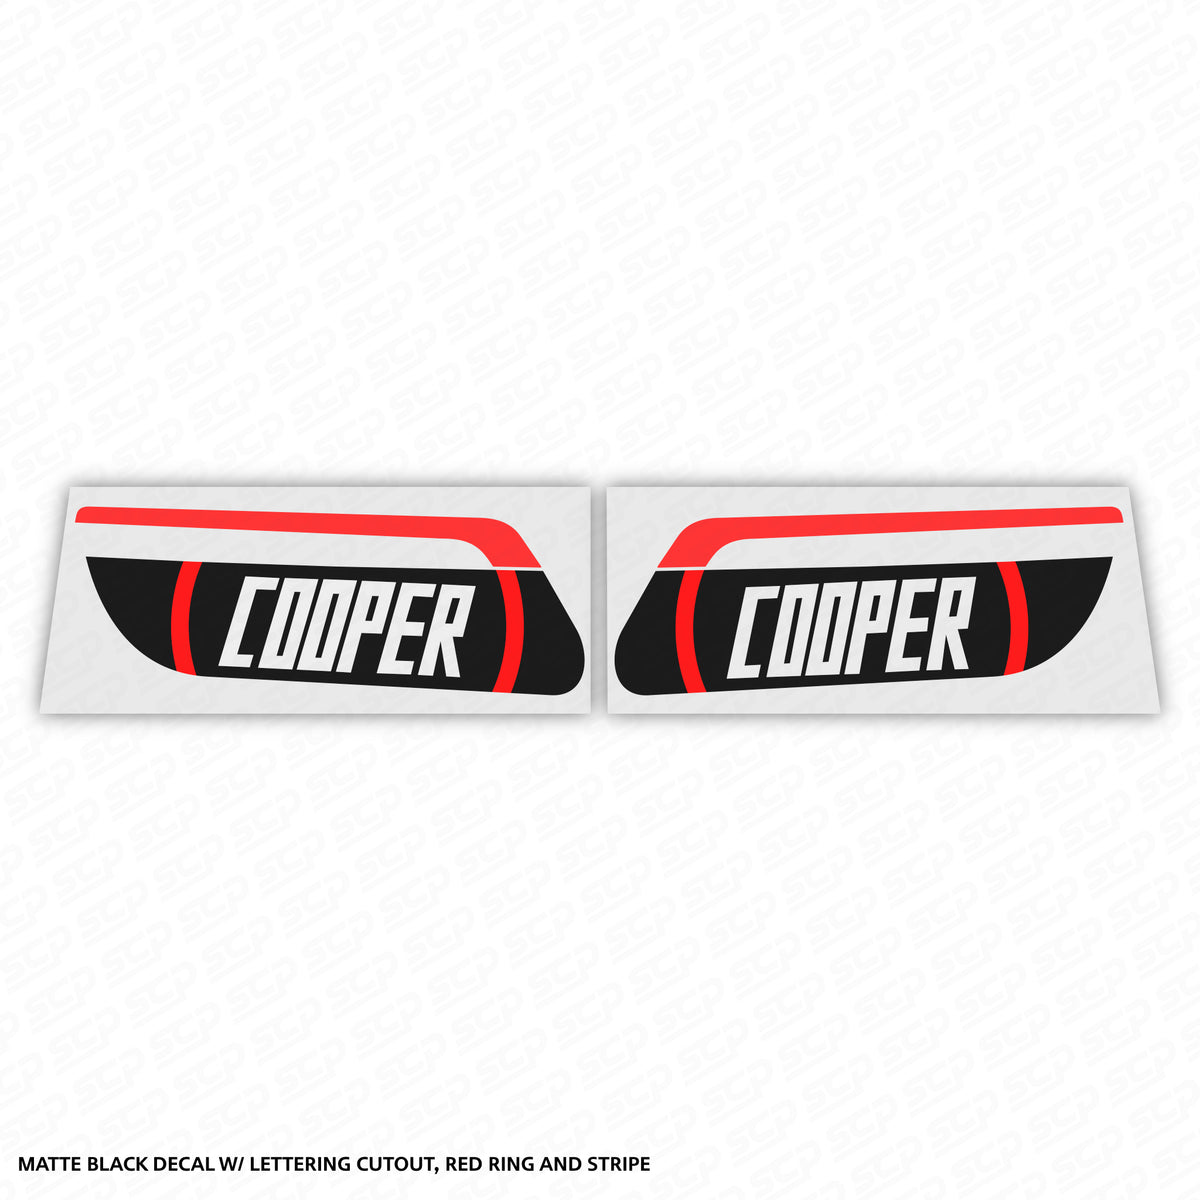 MINI F-Series LCI 2 Dynamic Sequential Indicator Faceplate Decal - Cooper